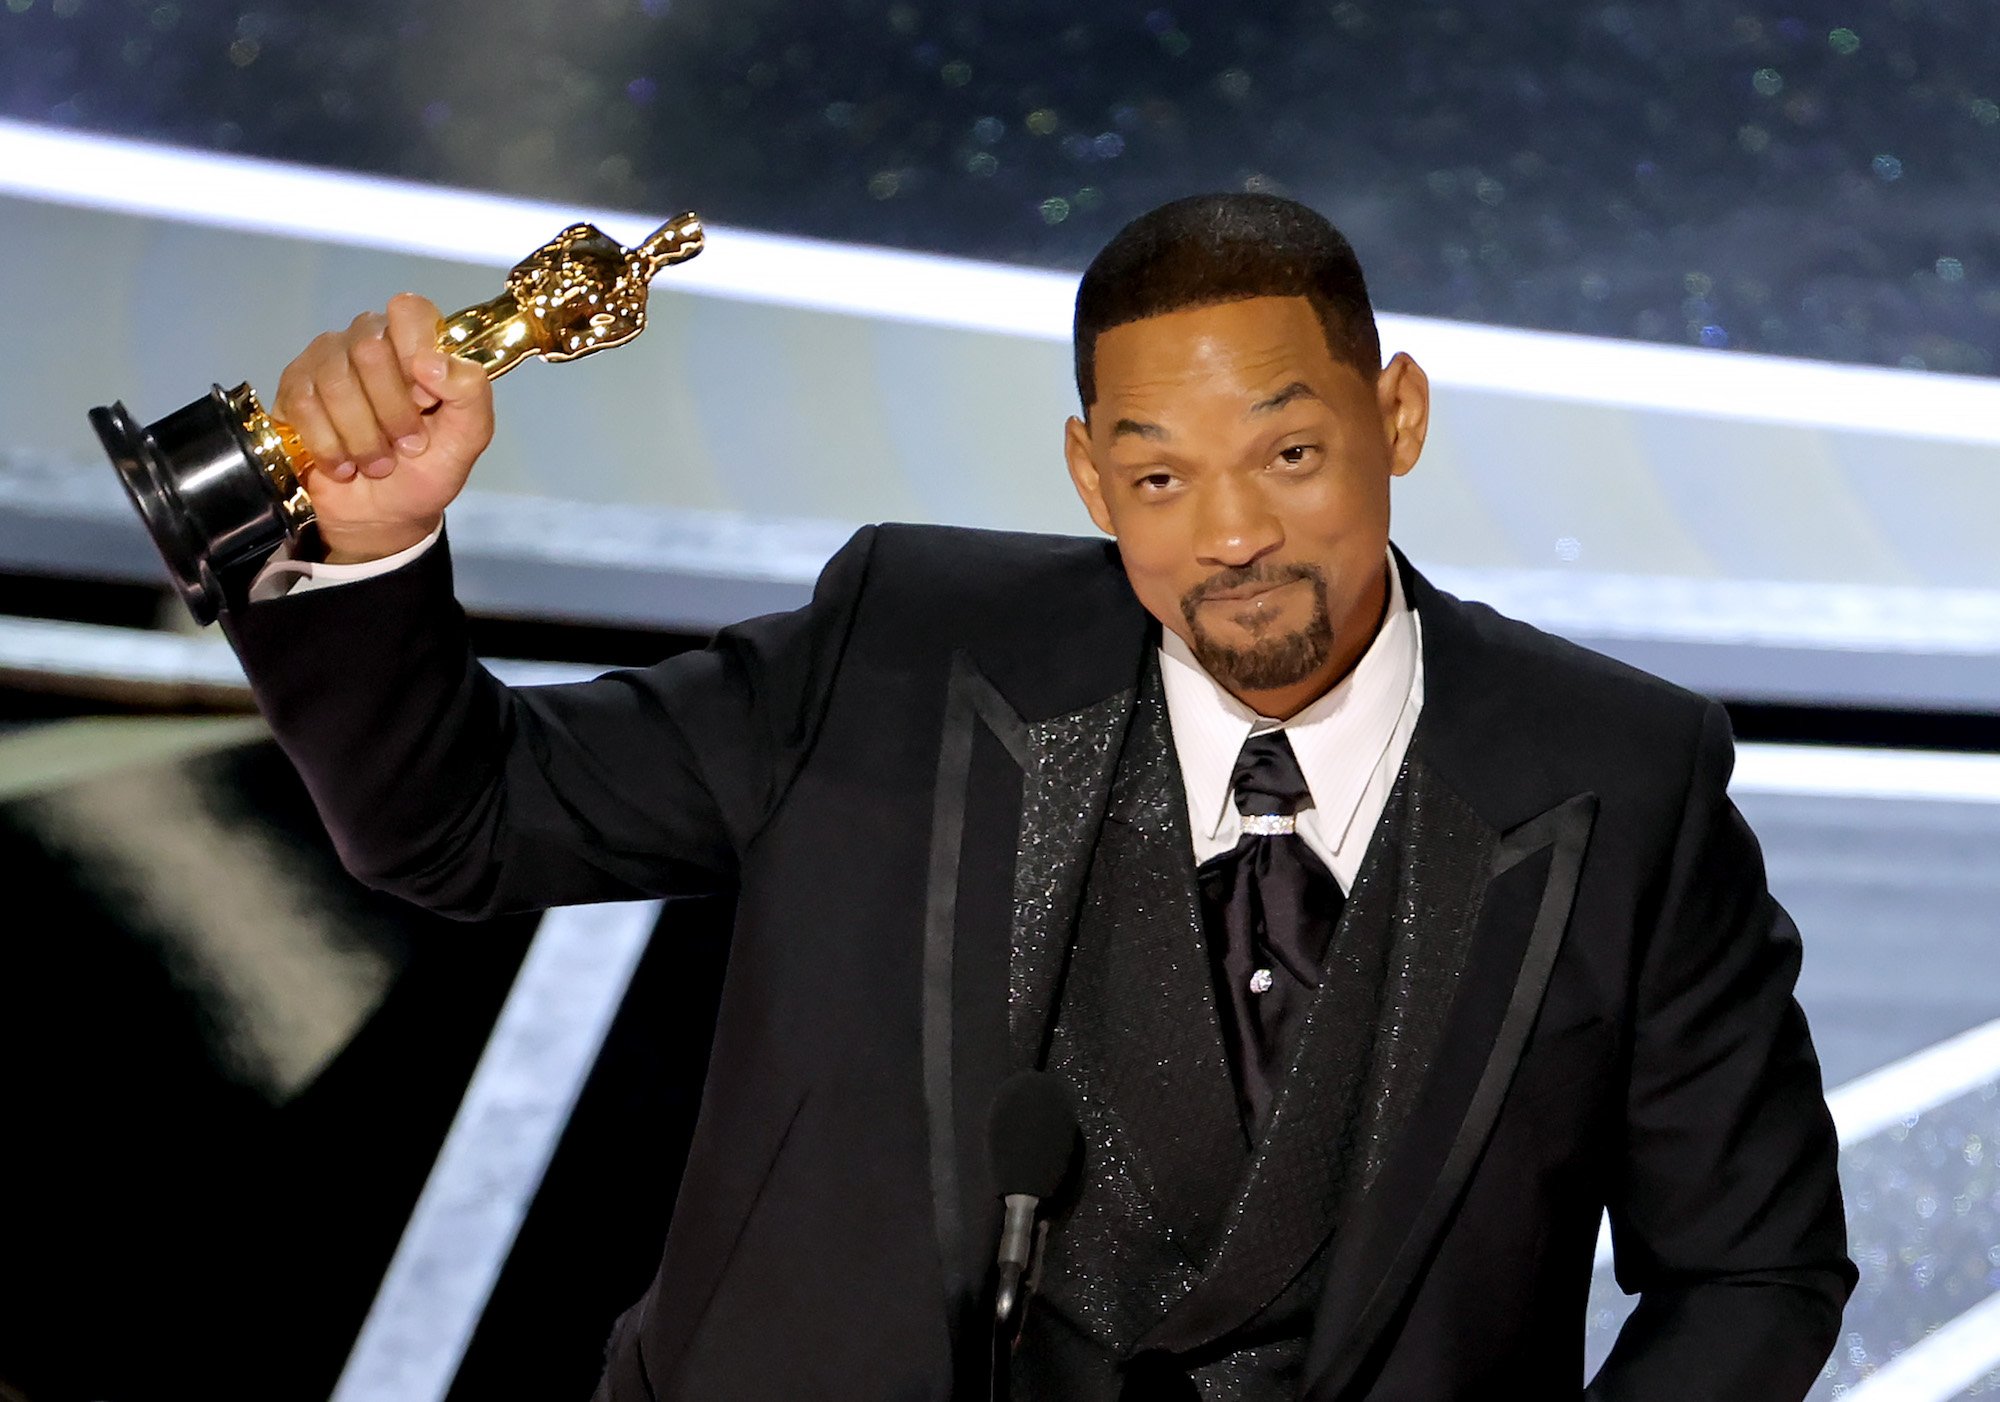 Will Smith Has Until April 18 to Respond to Oscars Board, May Be Suspended, Expelled